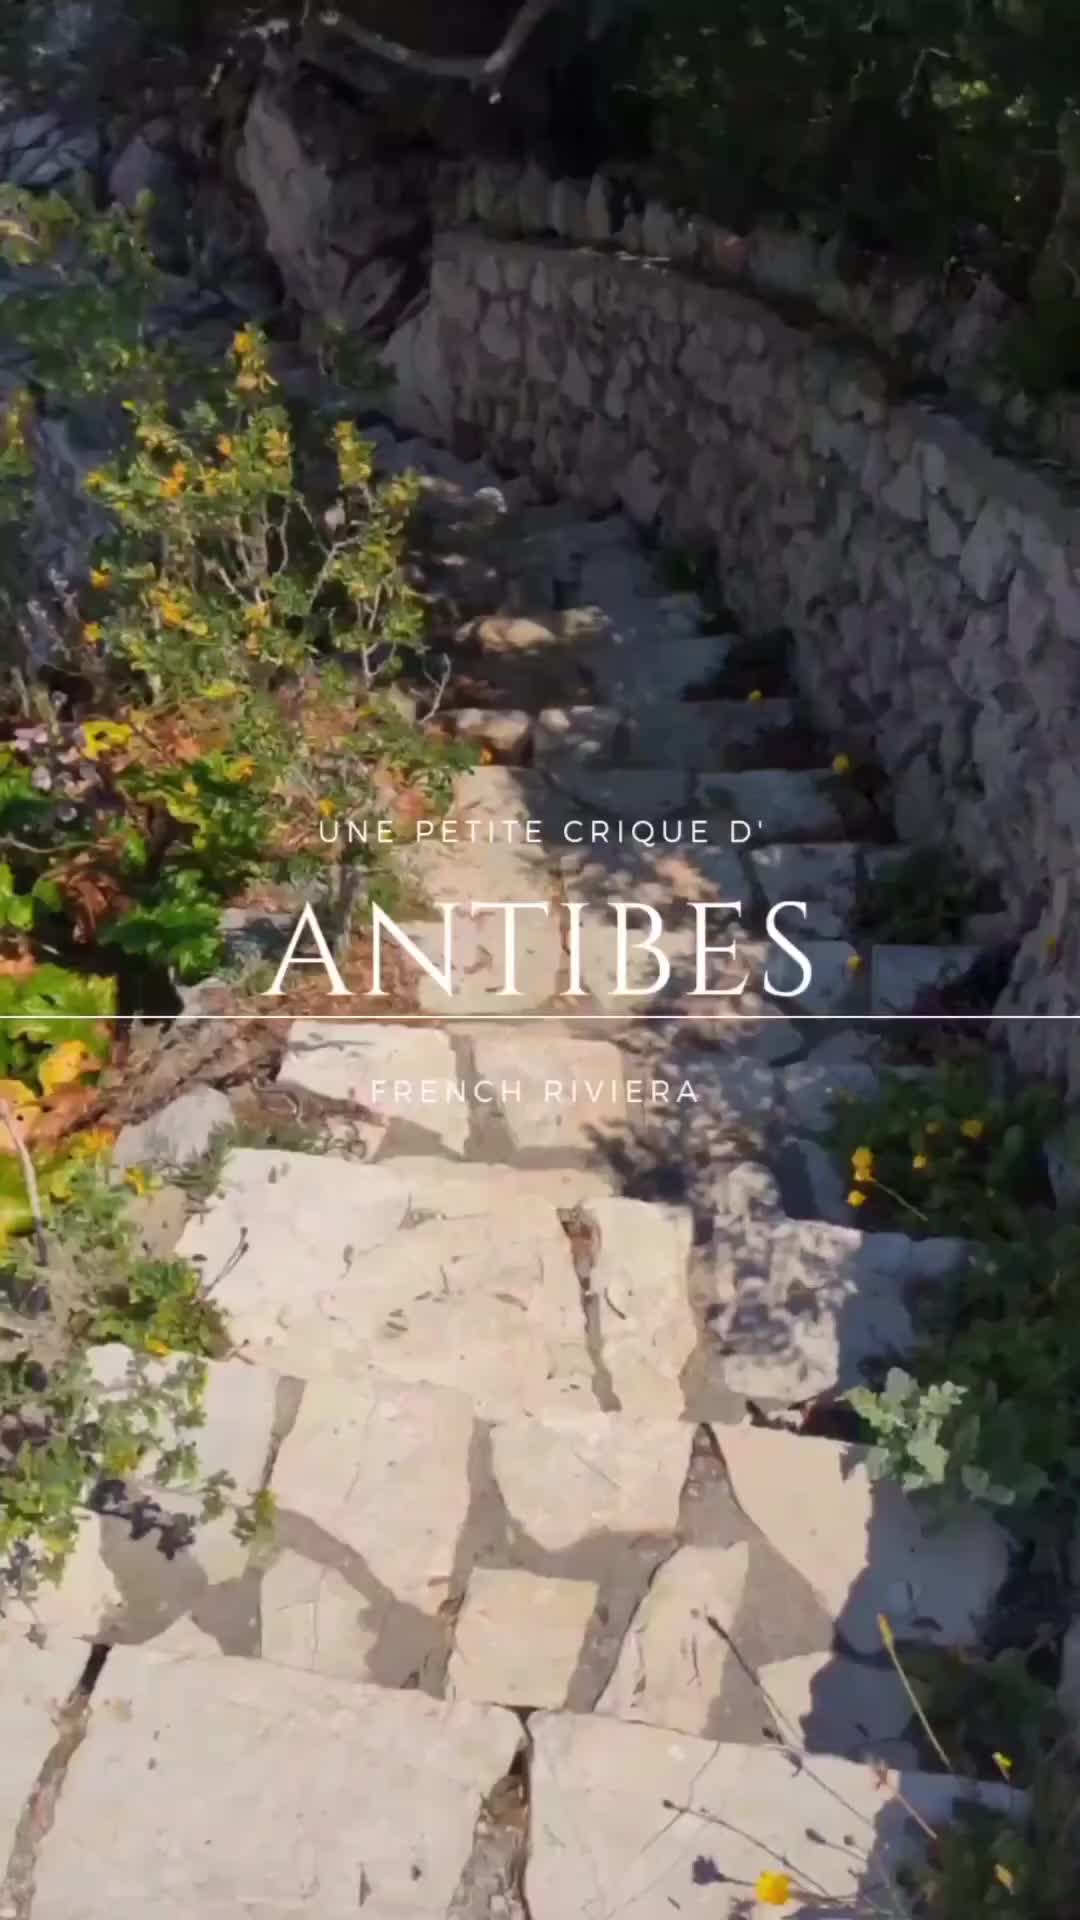 Discover Hidden Beaches in Antibes, French Riviera